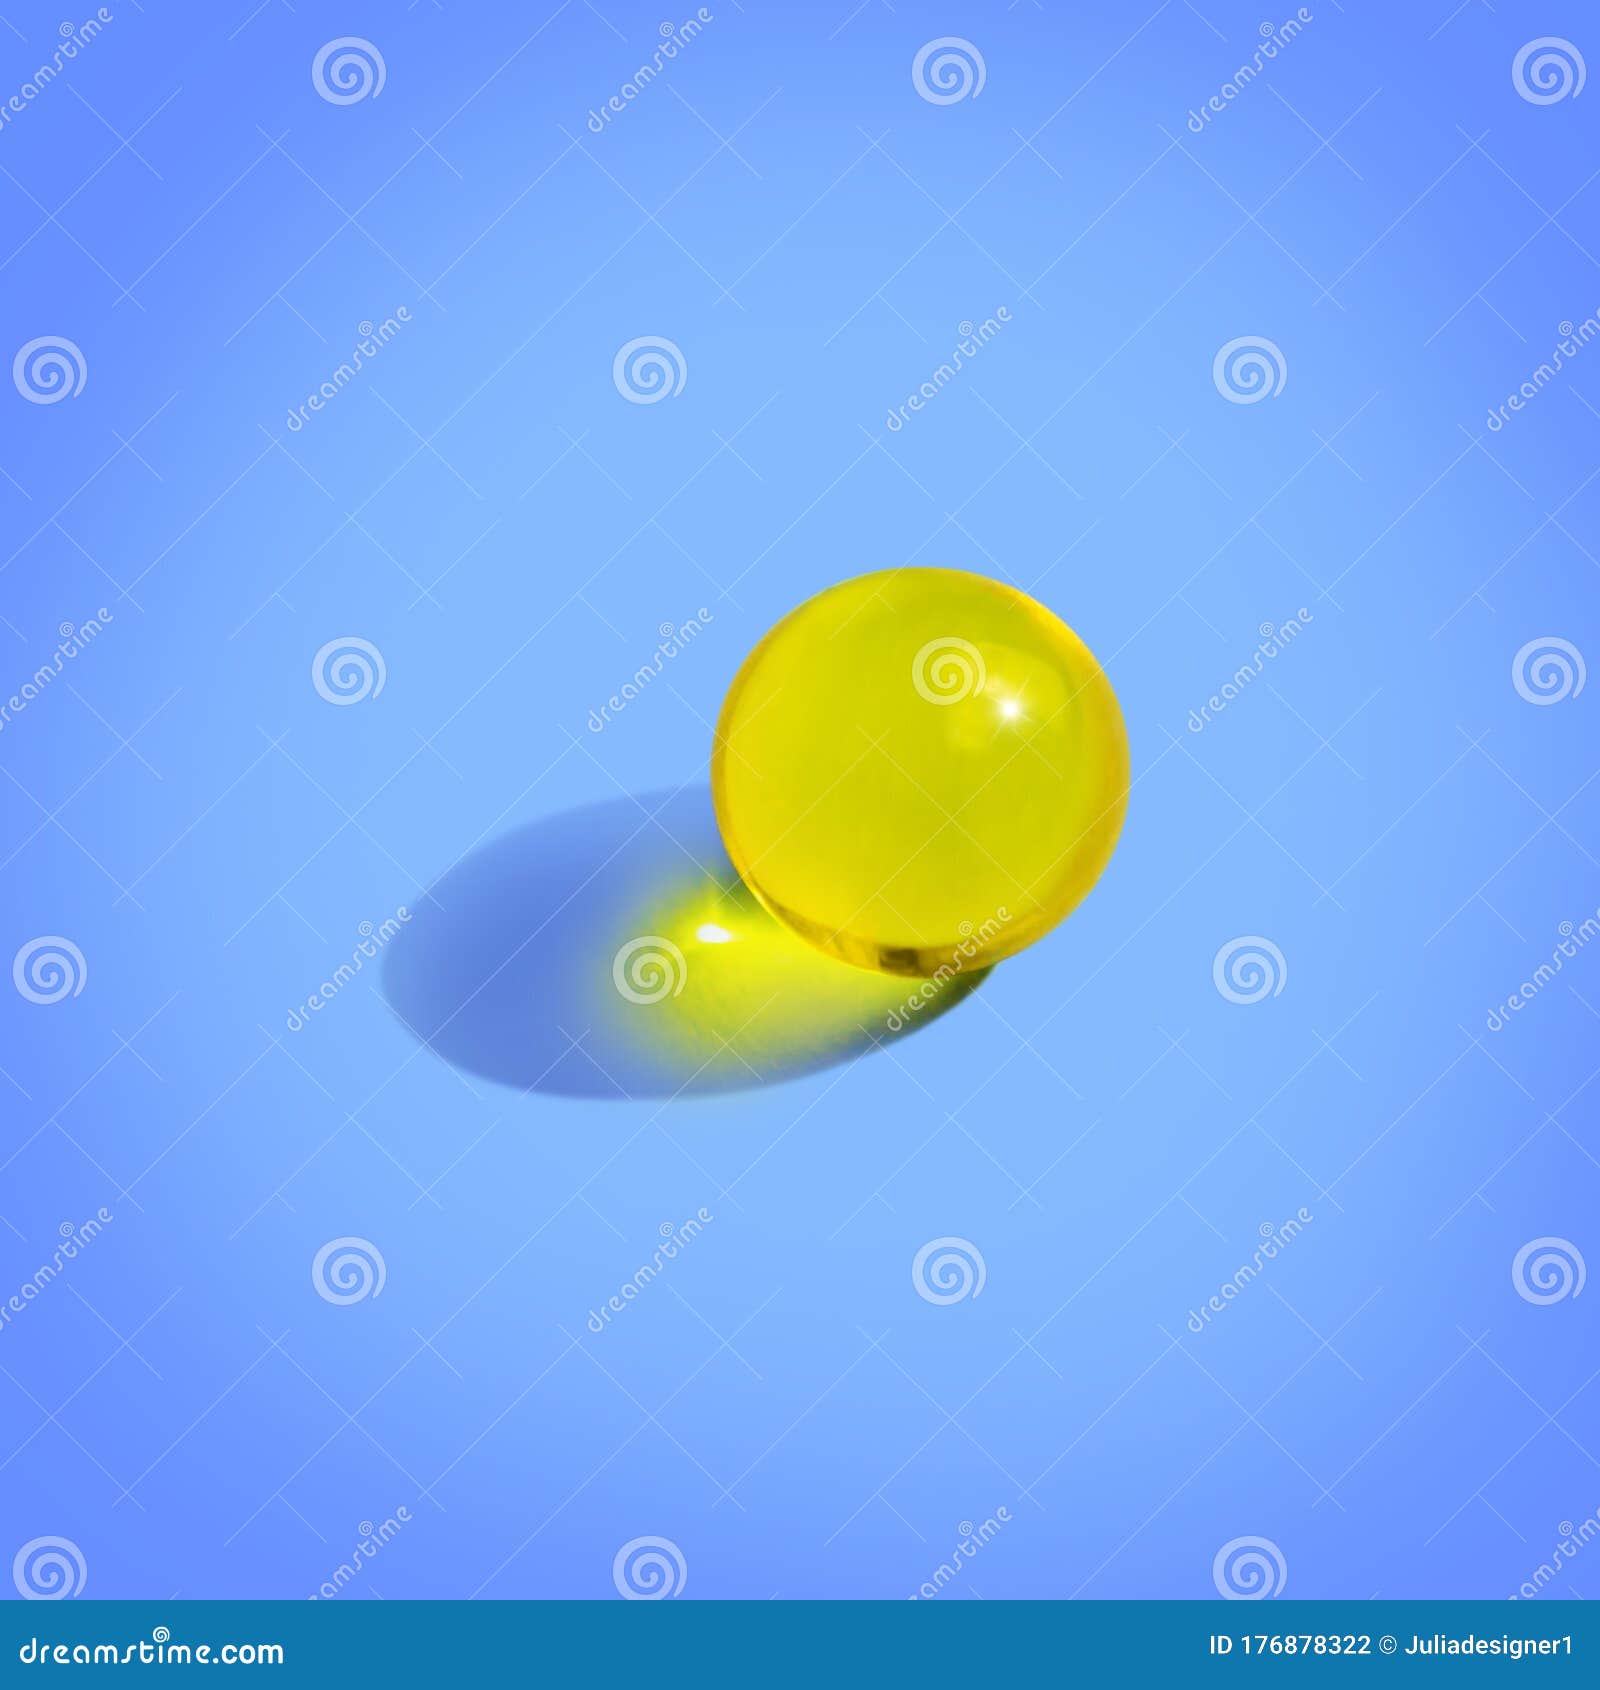 round yellow pill on blue background. close up pharmacy health care concept. organic liquid nutrition, oil